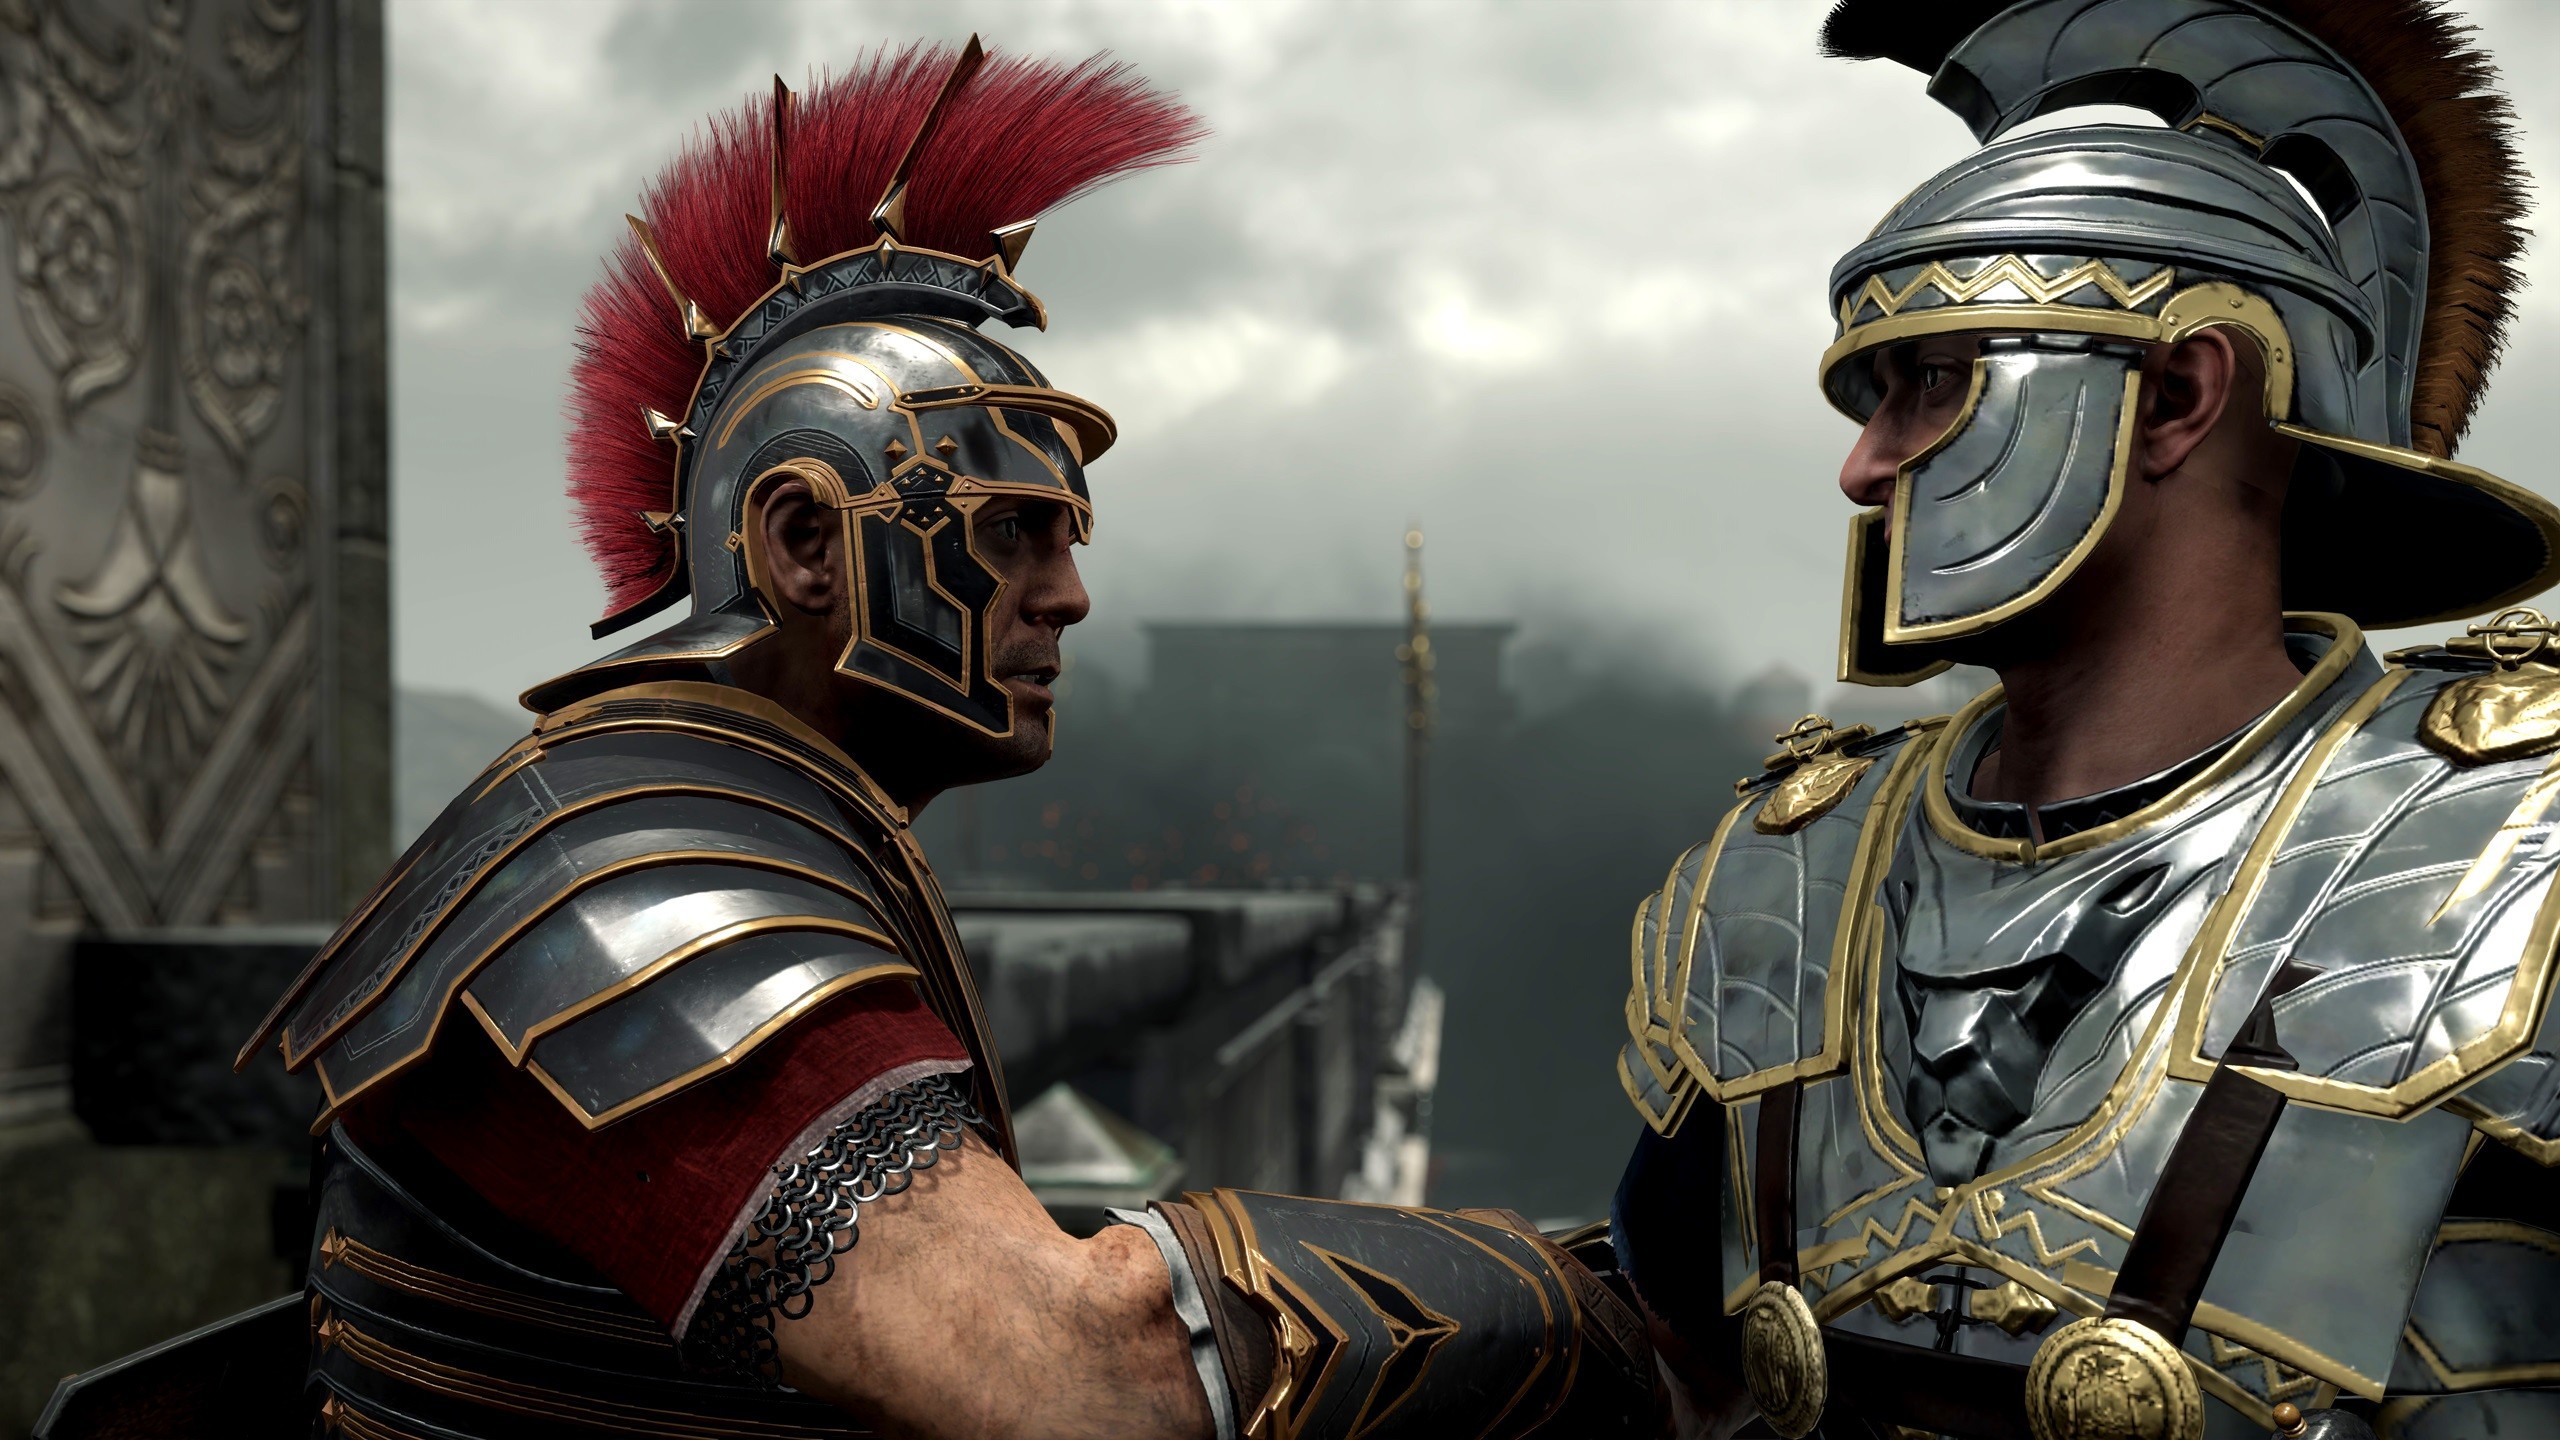 The Roman Soldiers Wallpaper And Image Pictures